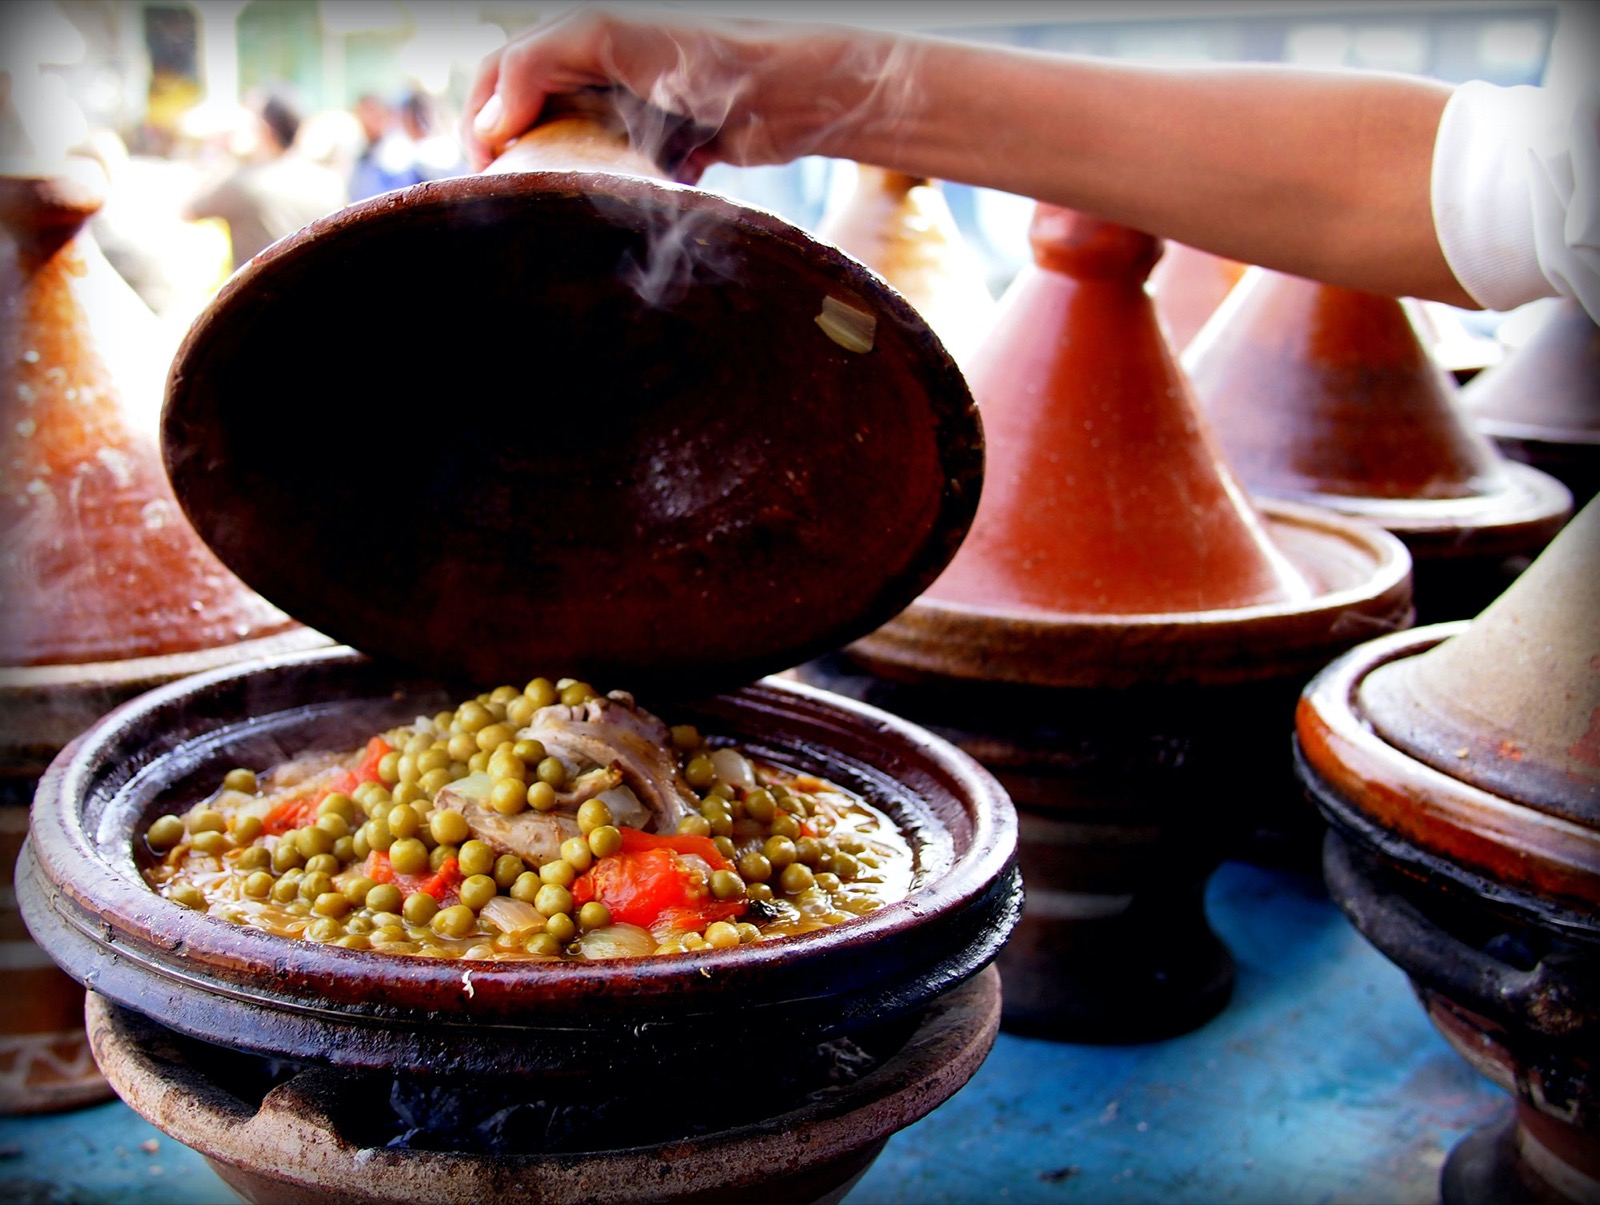 🌭 Here Are 24 Street Foods Around the World – Can You Match Them to Their Continent? Tajine